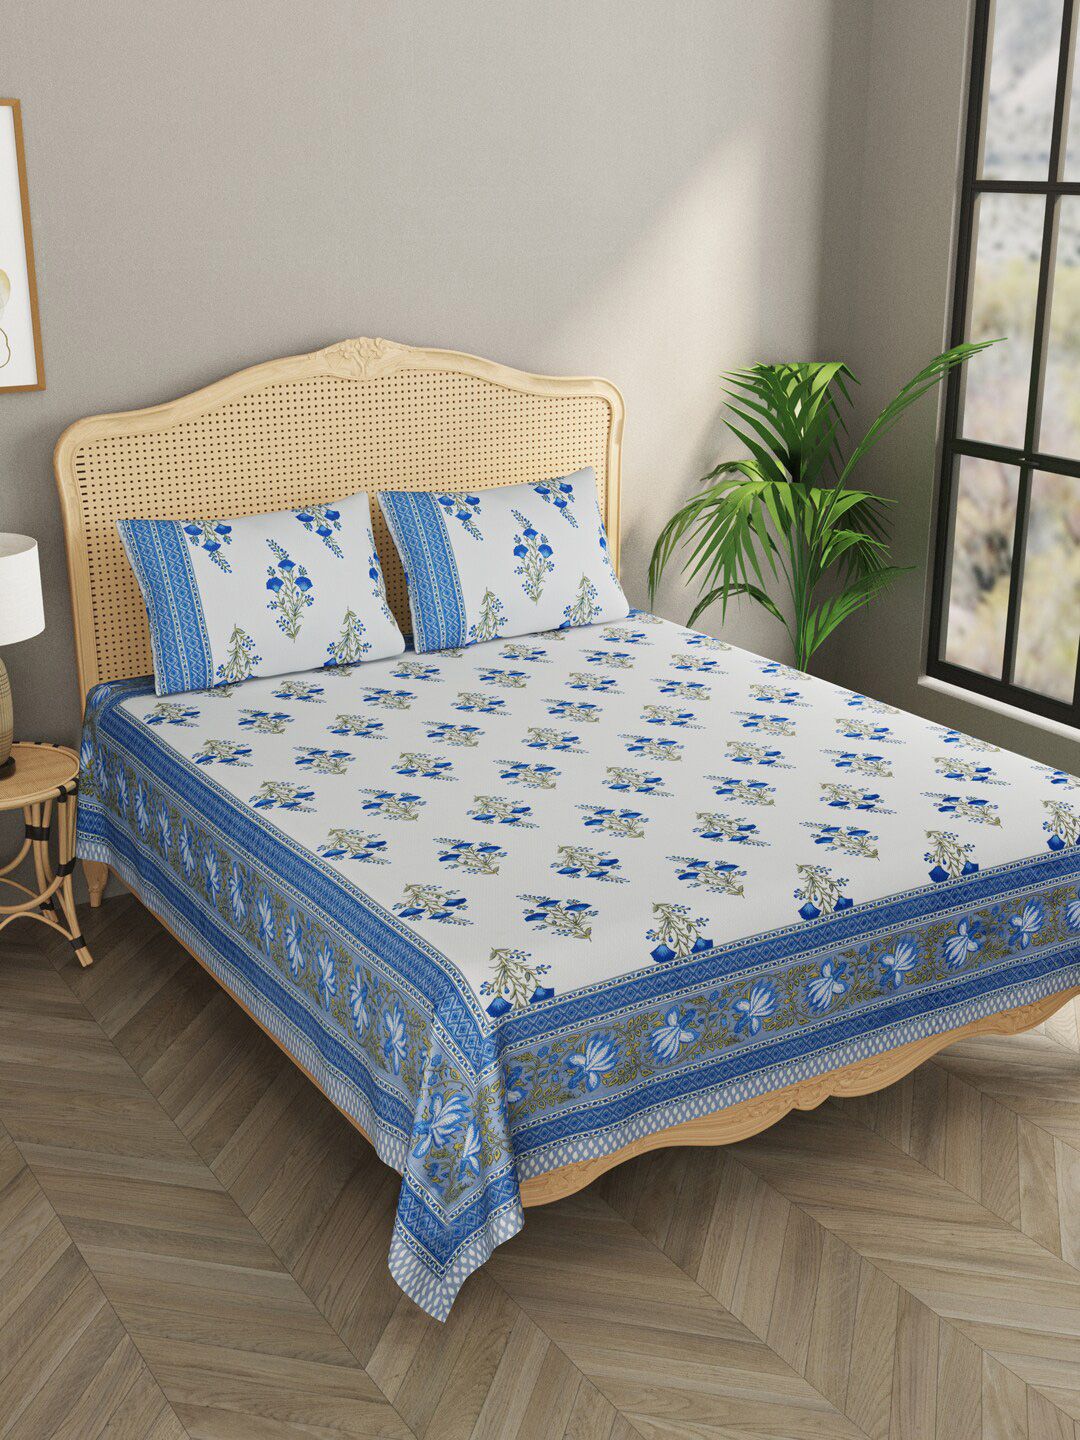 Gulaab Jaipur Blue & White Ethnic Motifs 600 TC Cotton King Bedsheet with 2 Pillow Covers Price in India